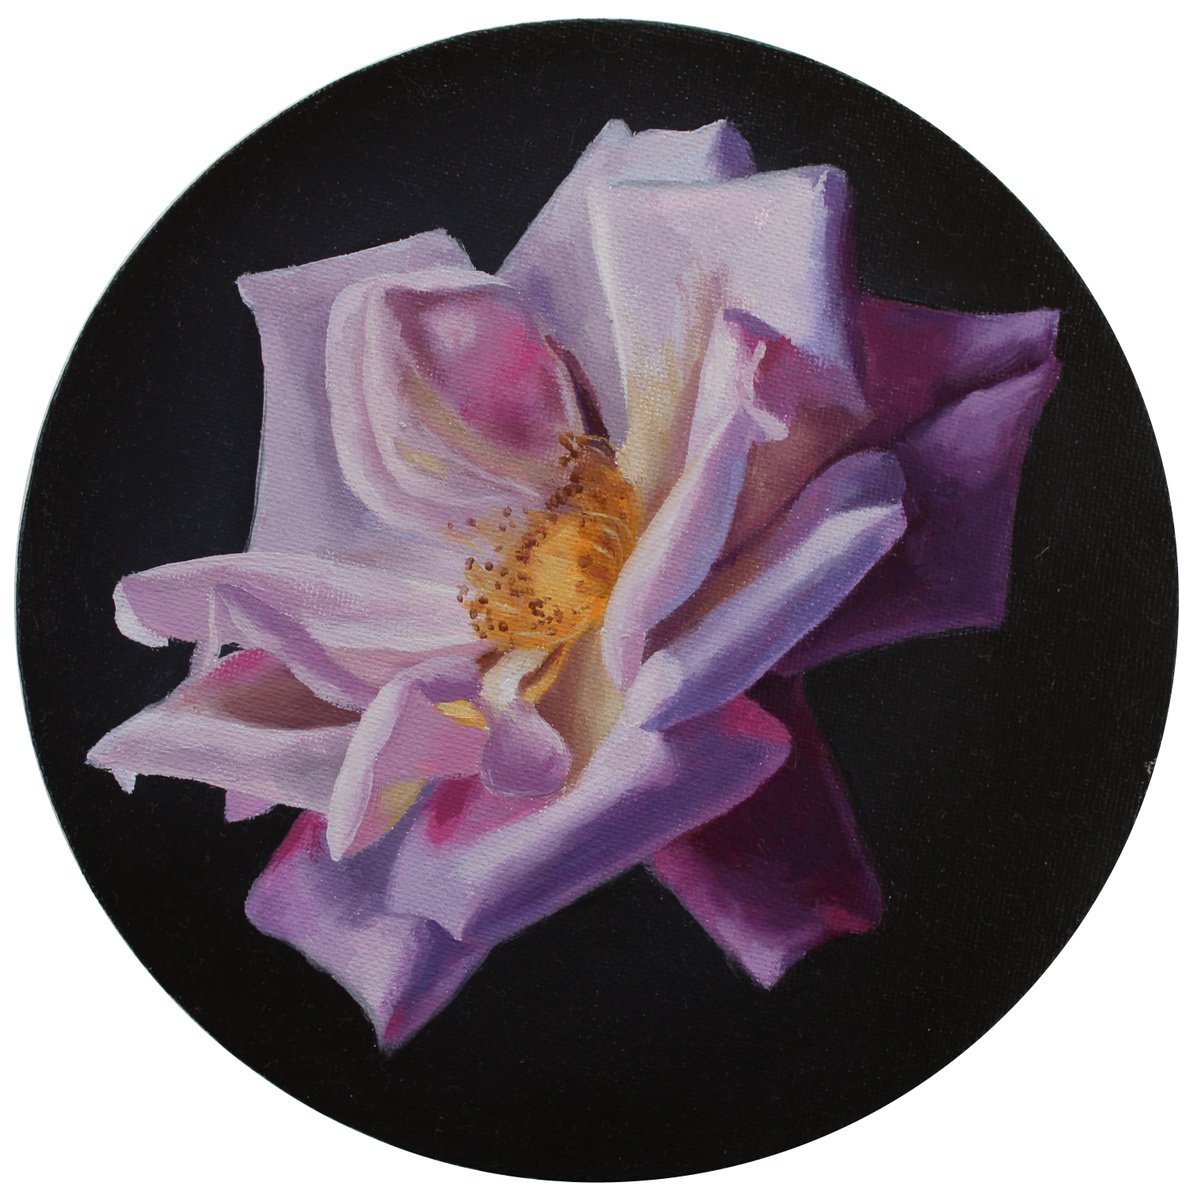 Summer dream. A rose the color of lilac. by Natalia Zhukova